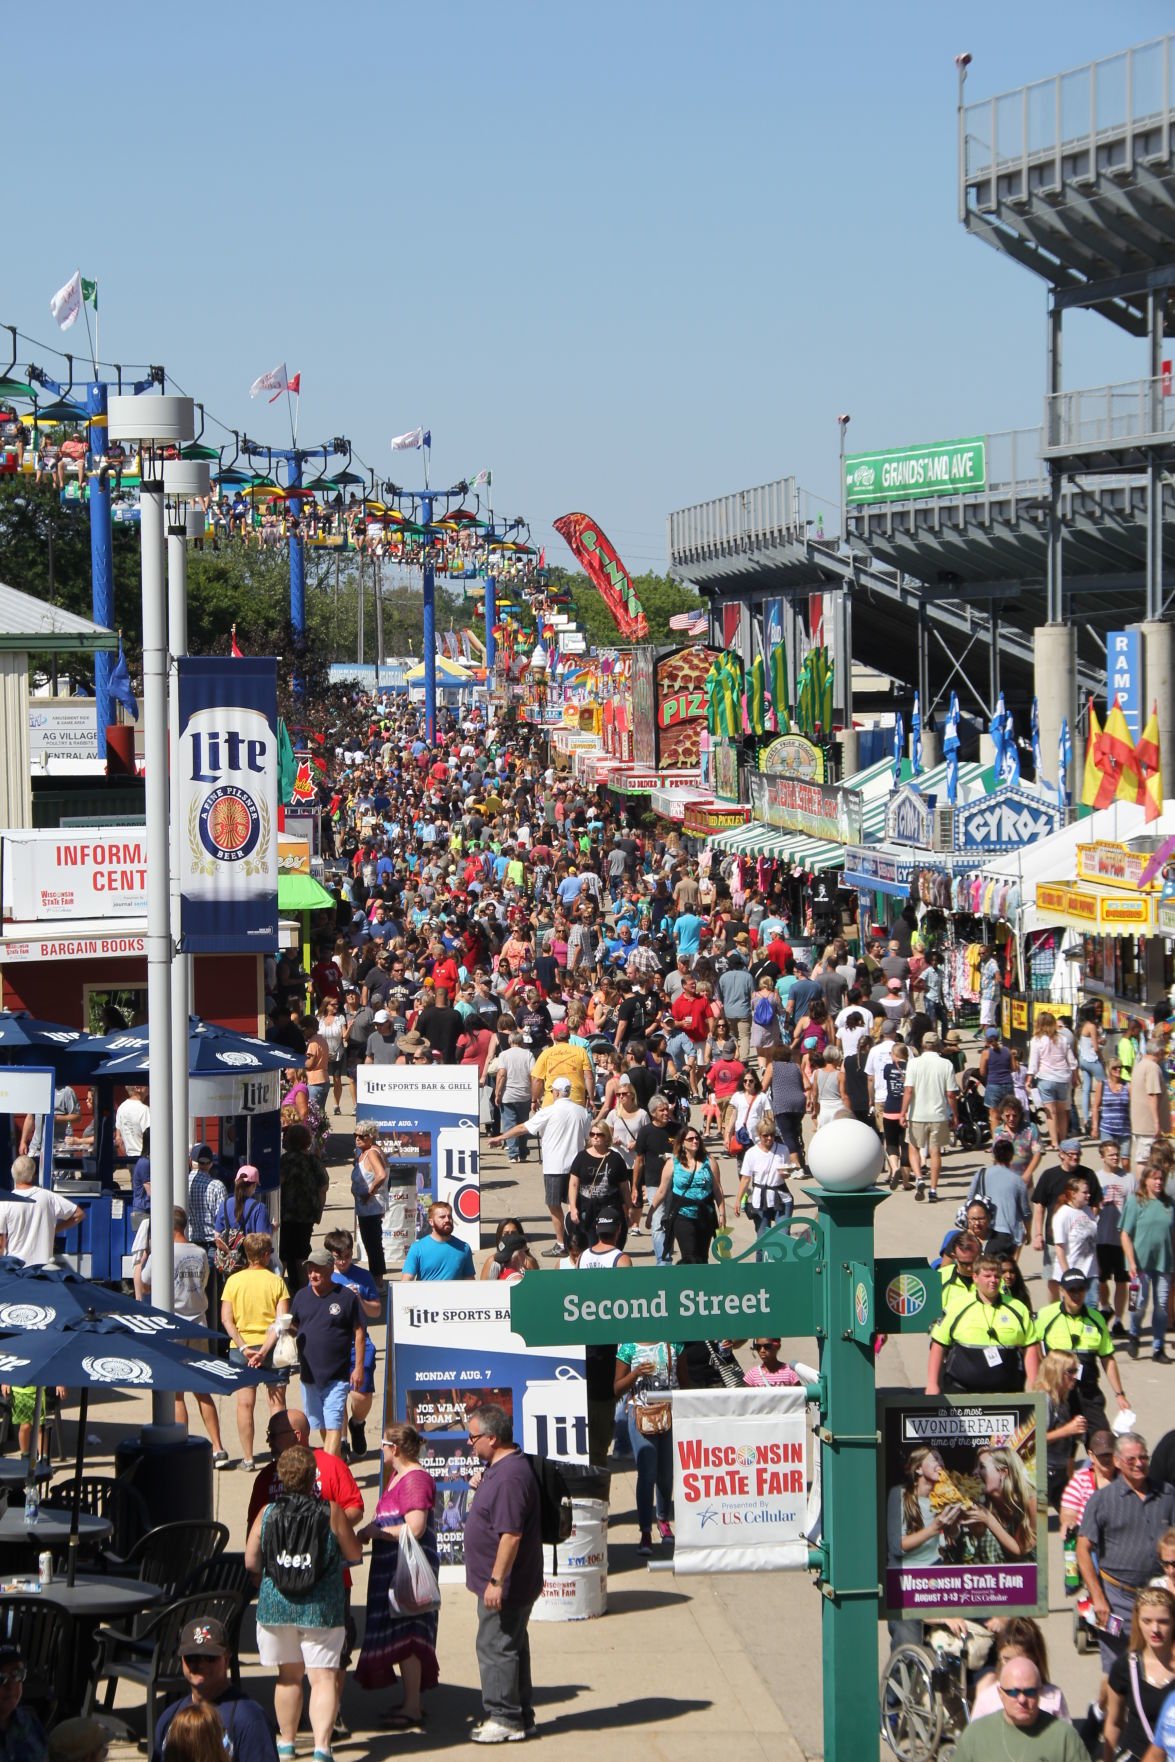 Another big crowd expected at State Fair Country Life